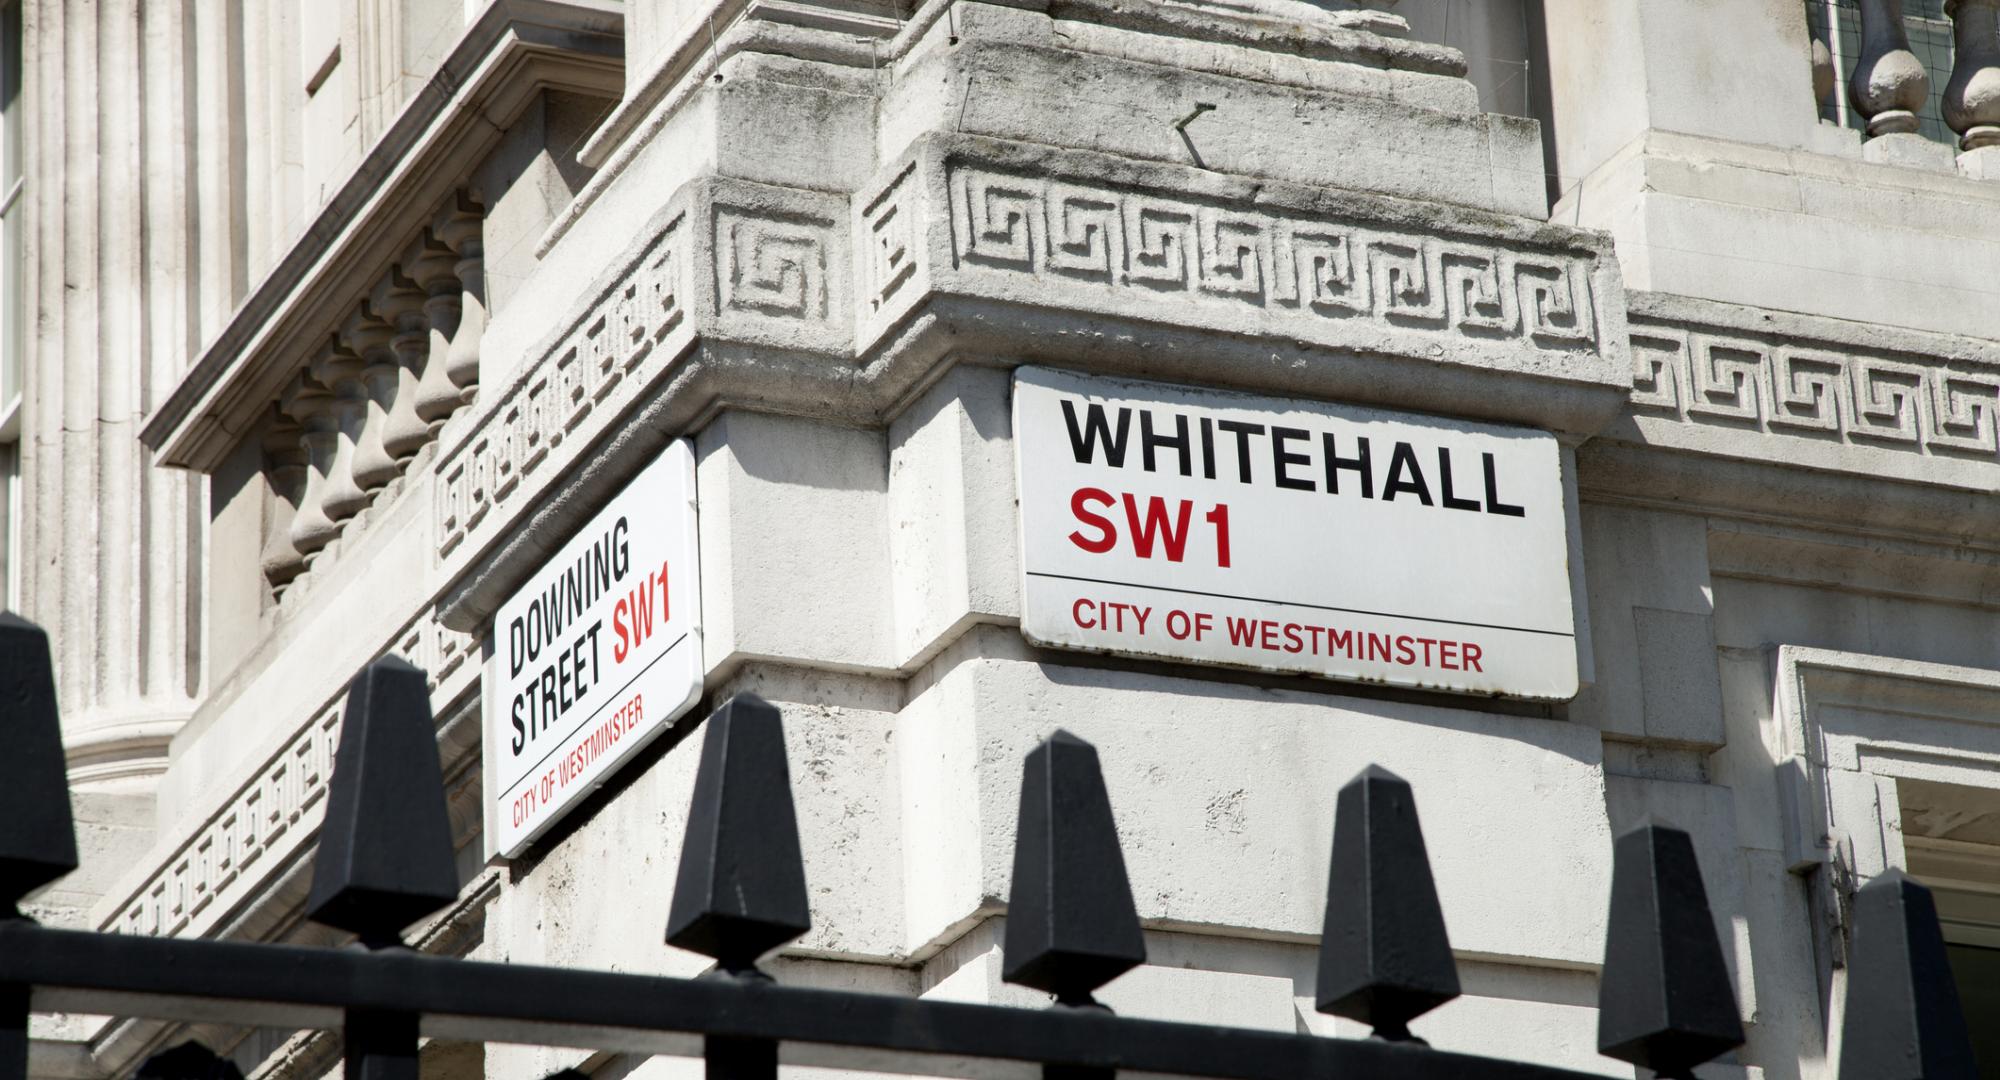 Downing Street/Whitehall street signs